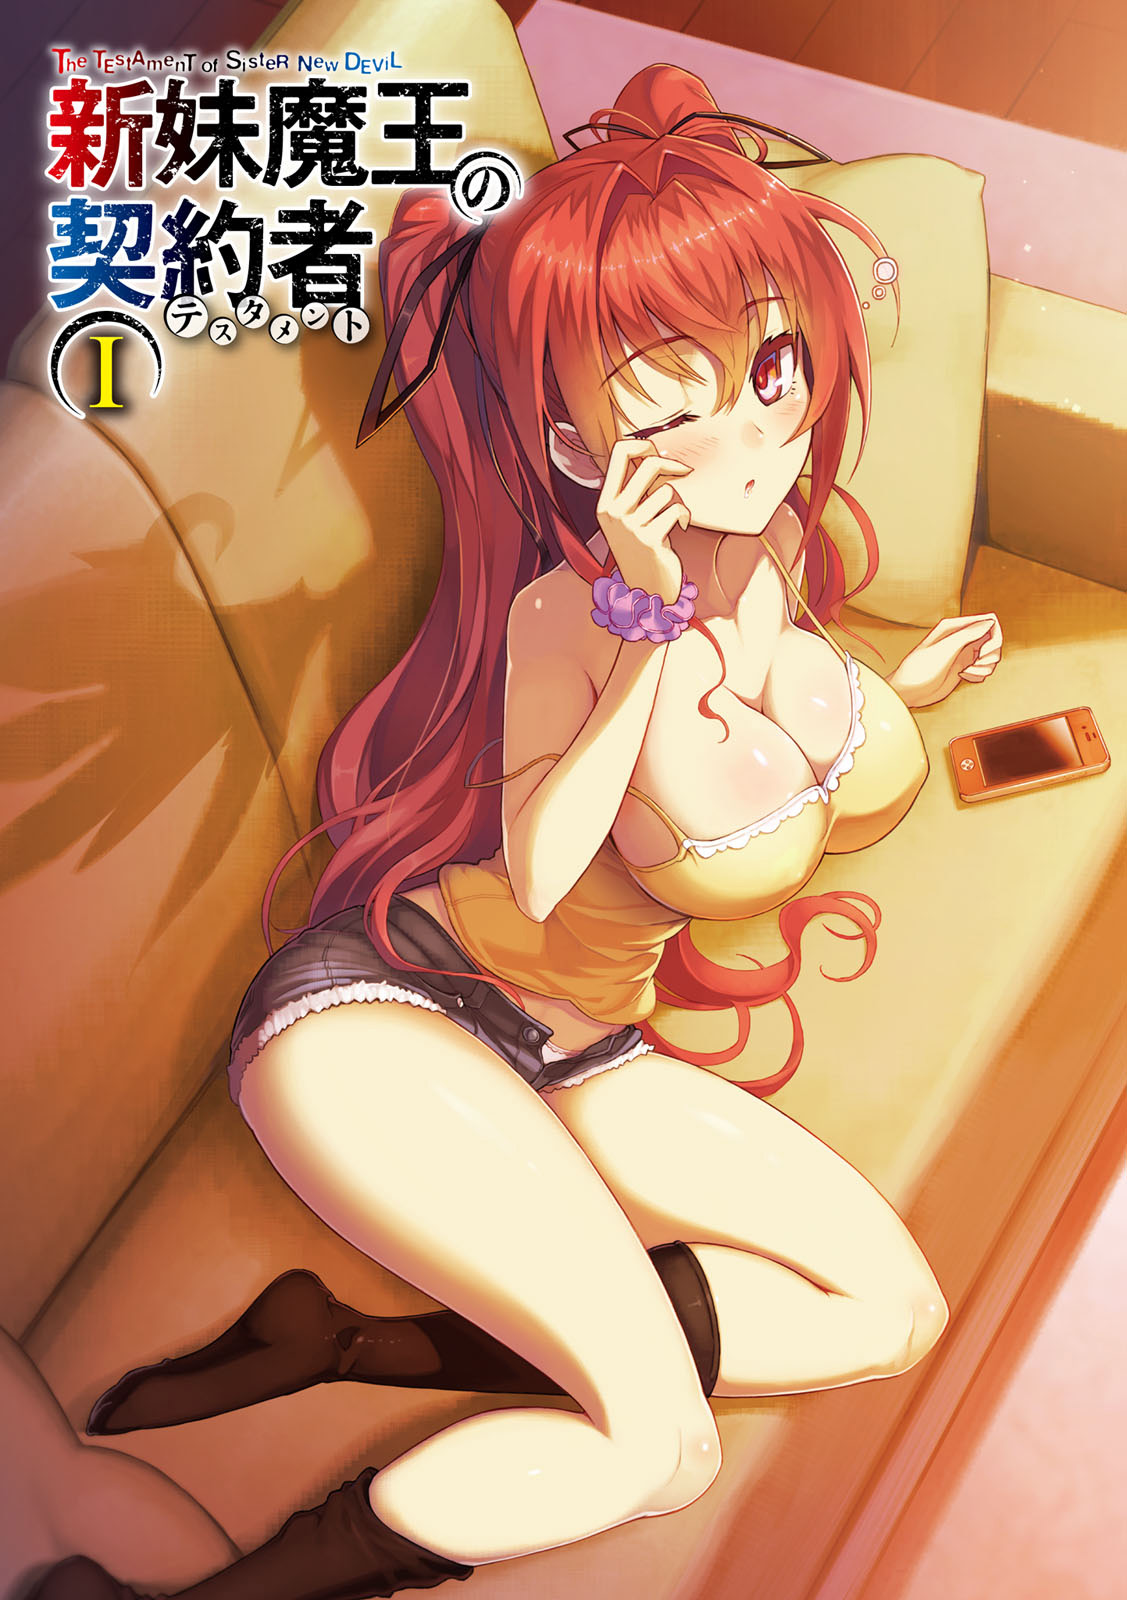 Testament Of Sister New Devill Hentai - The Testament of Sister New Devil Light Novel Illustrations - Page 3 -  IMHentai